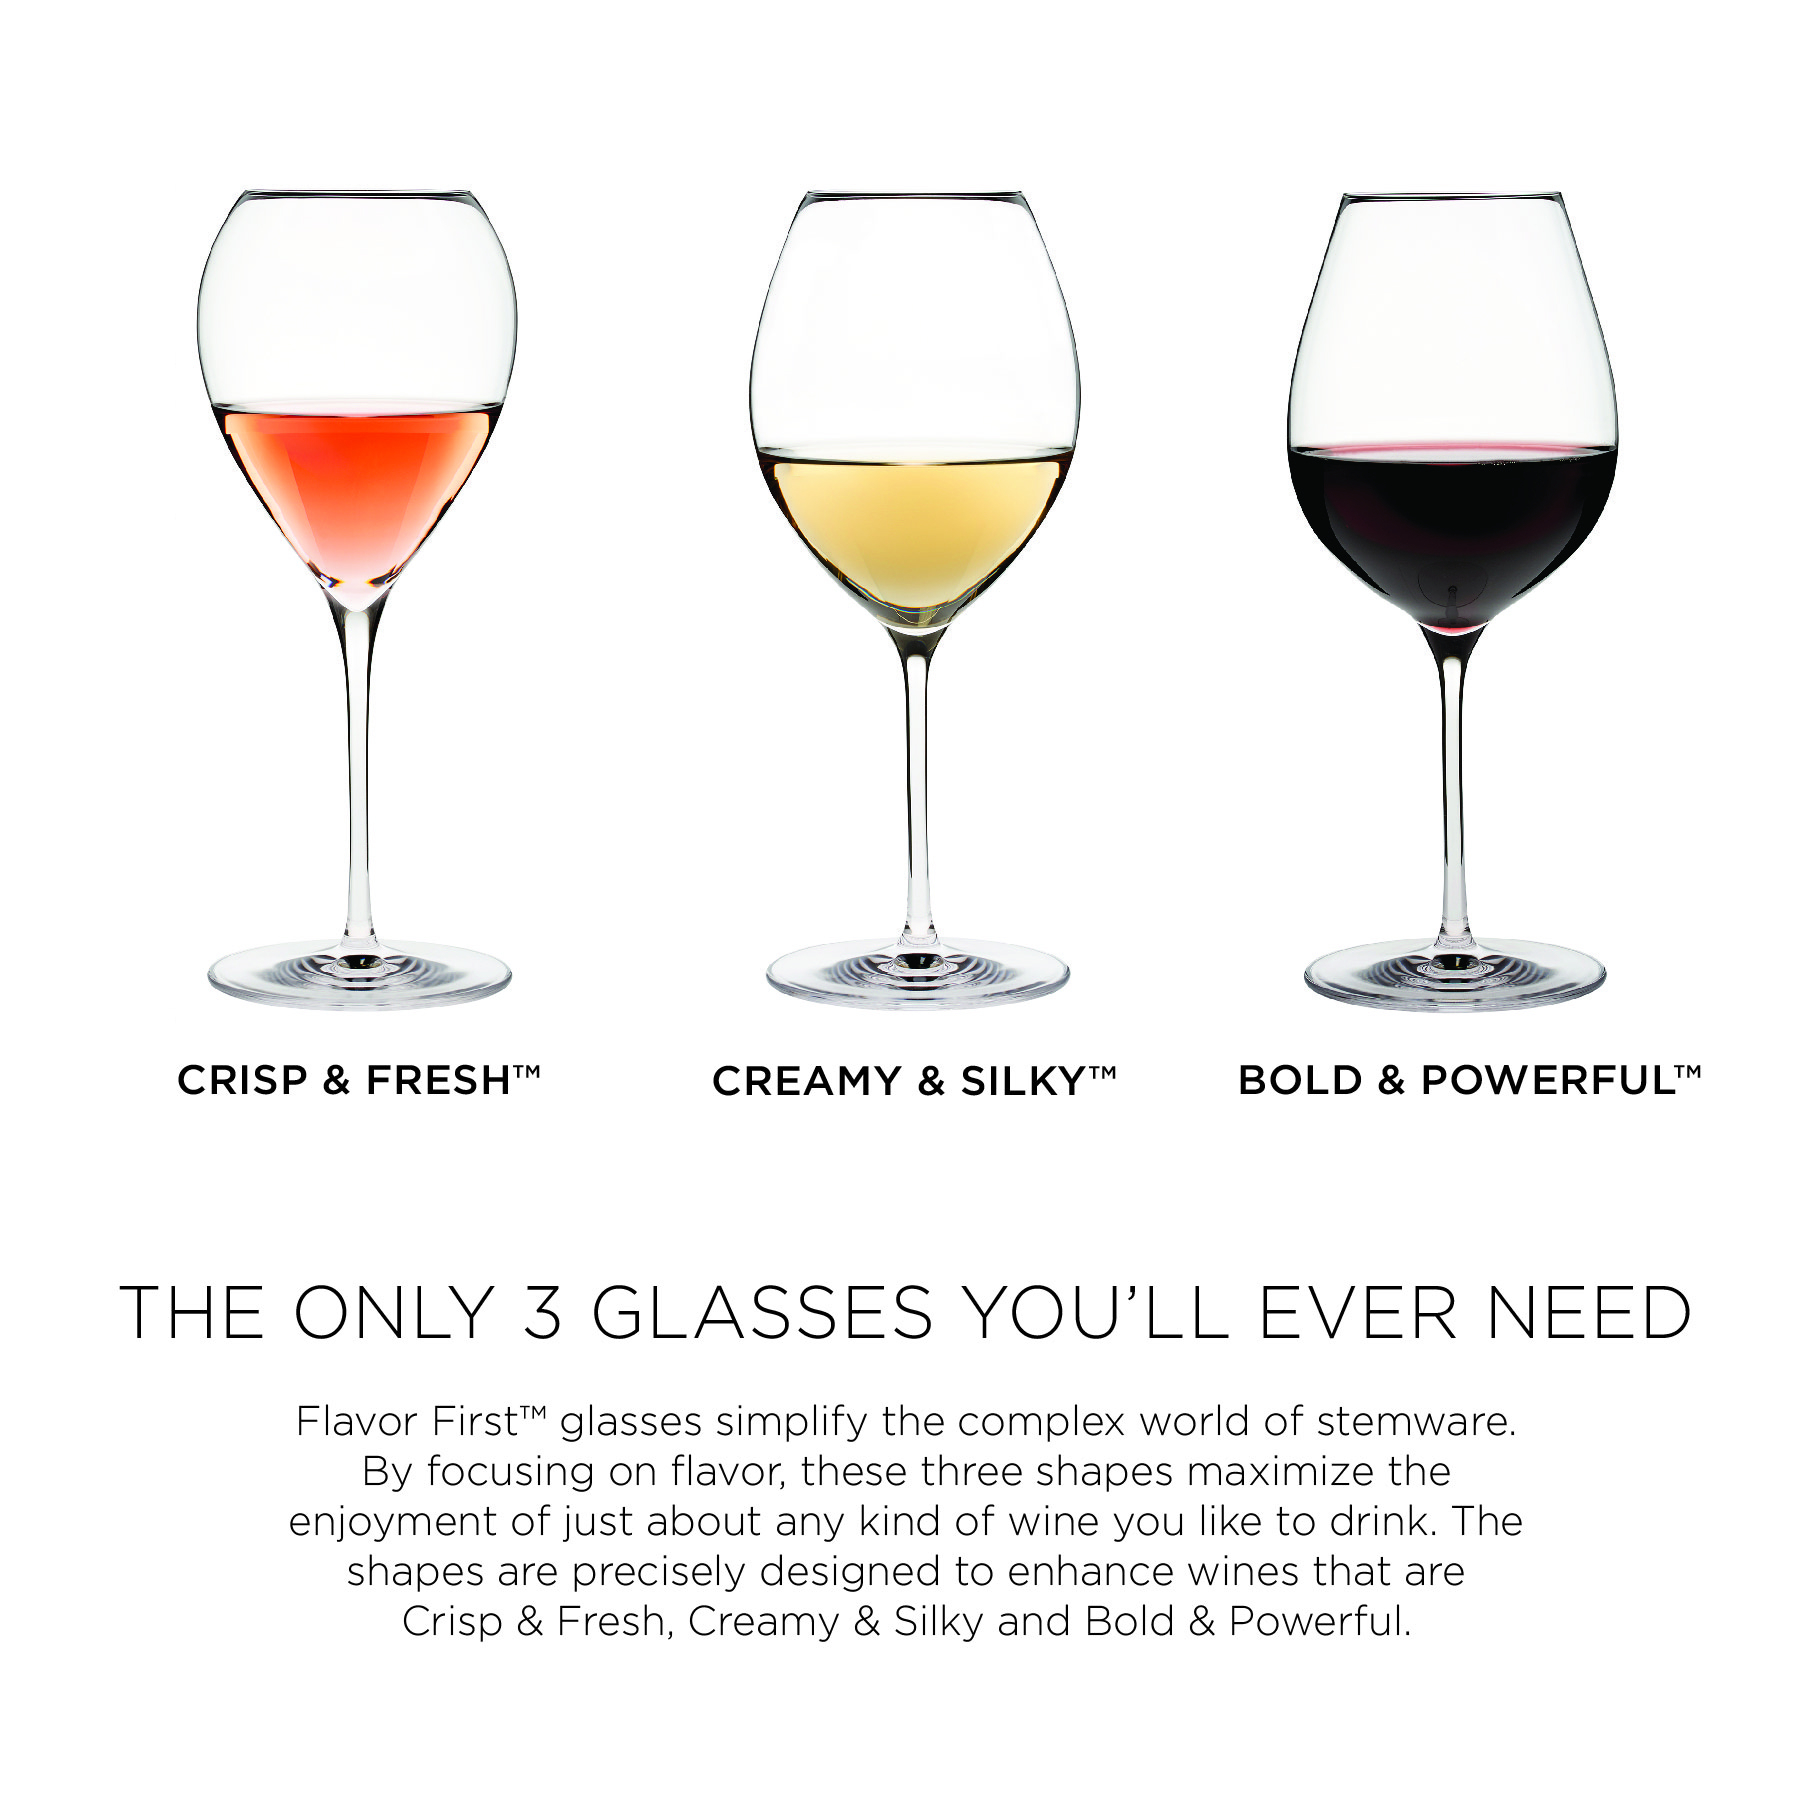 https://winespeed.com/wp-content/uploads/2020/11/2-The-Only-3-Glasses-You-Will-Ever-Need-on-WHT.jpg